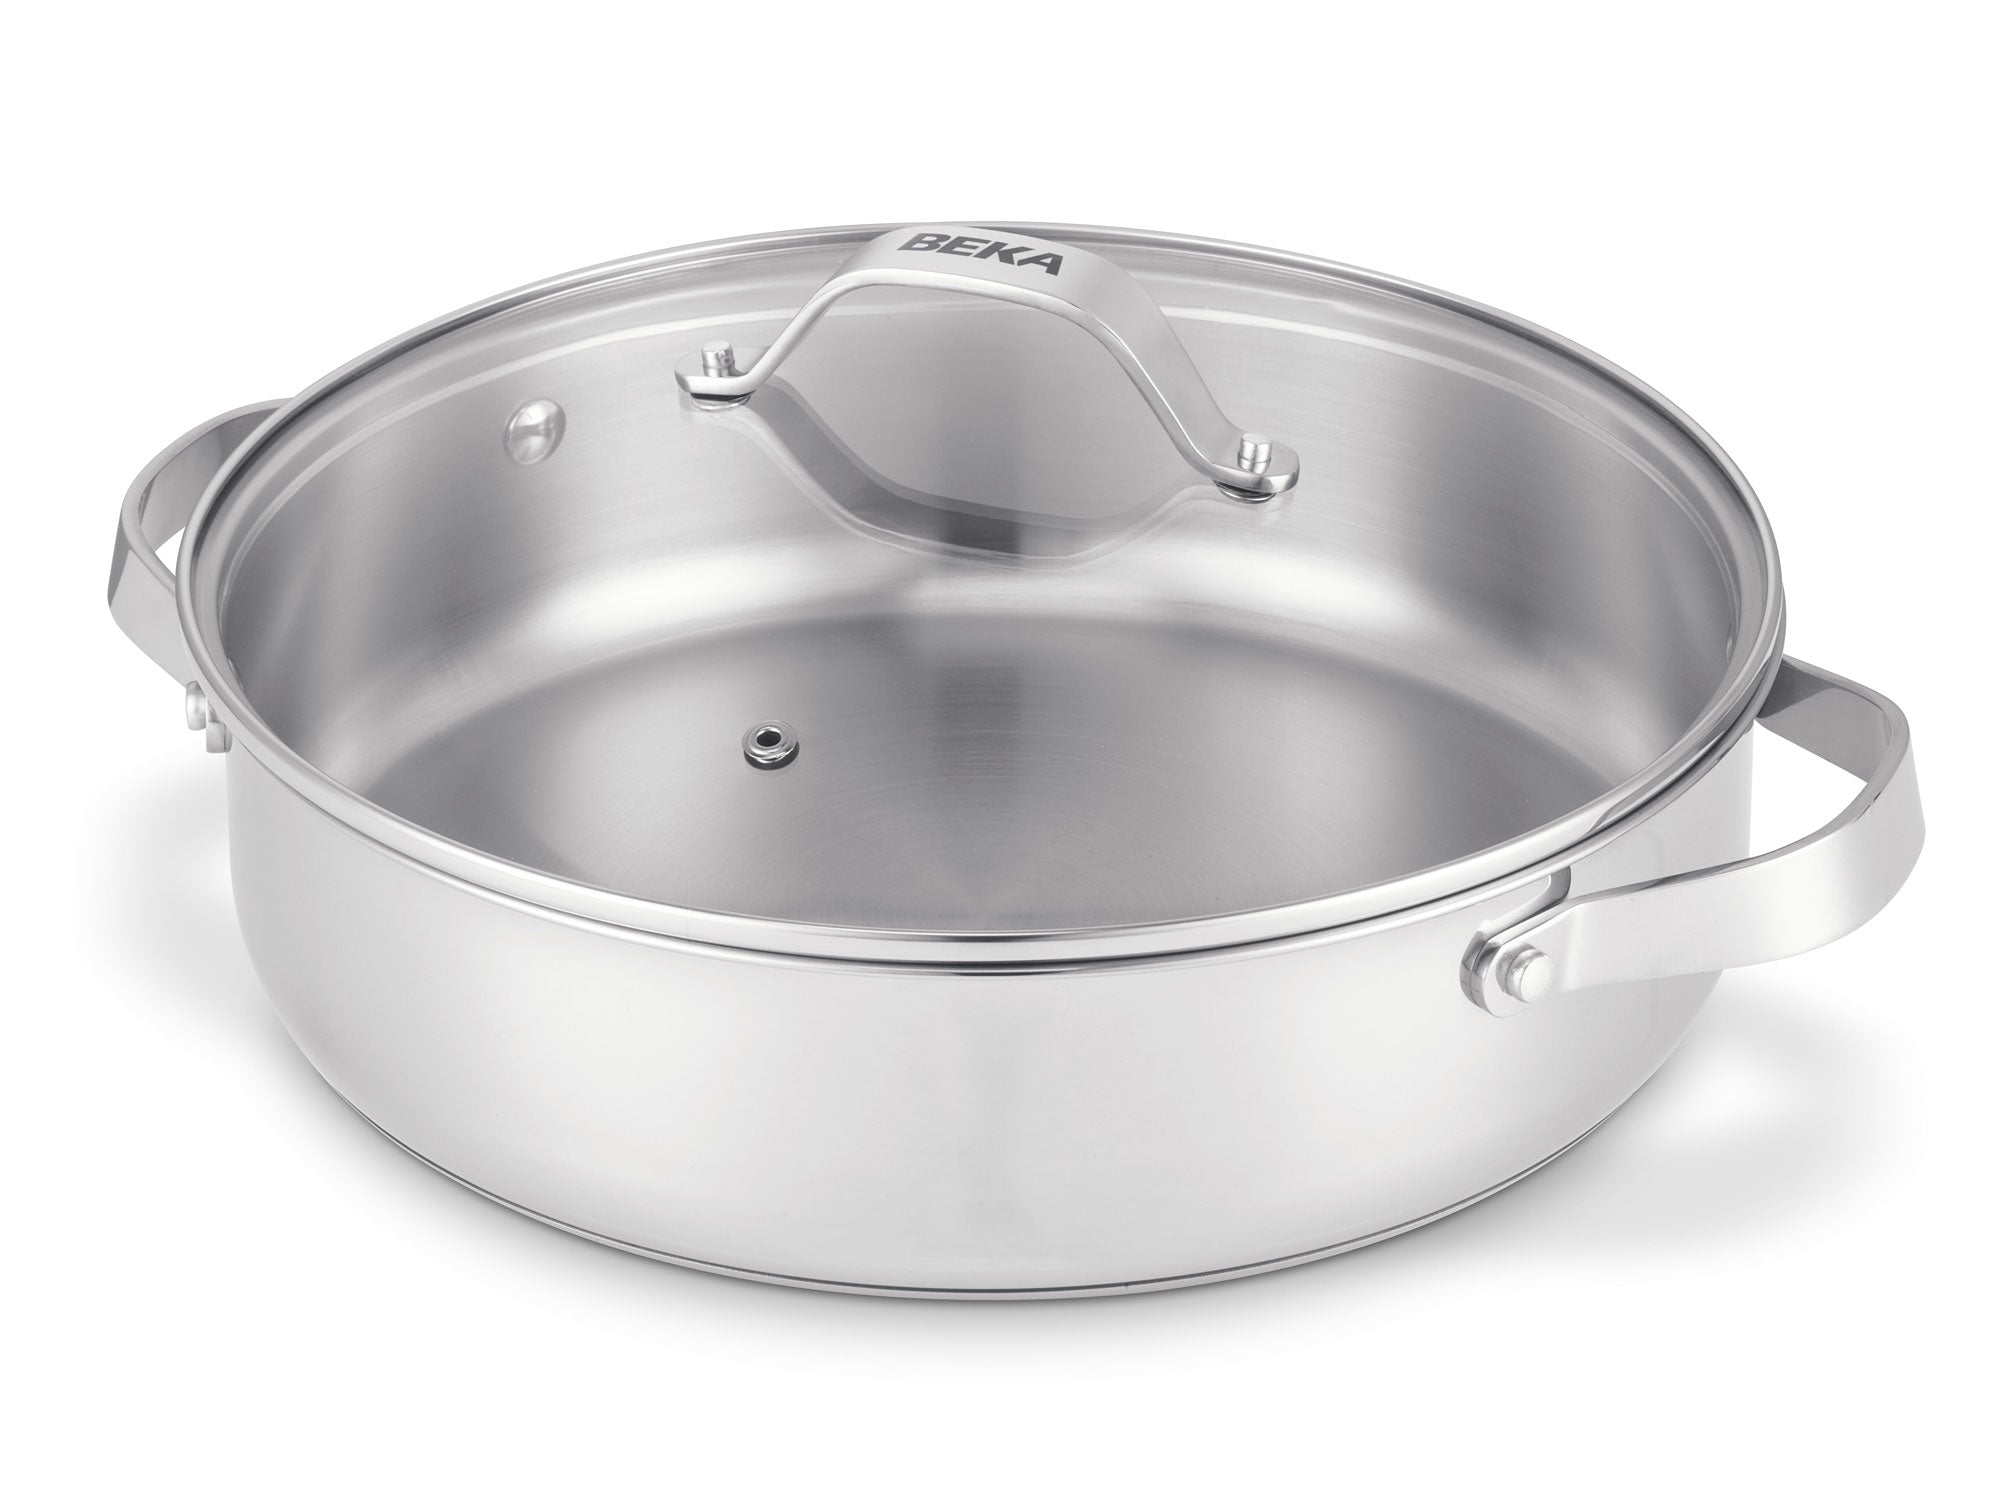  Beka - Cicla casserole with glass lid 24 cm in